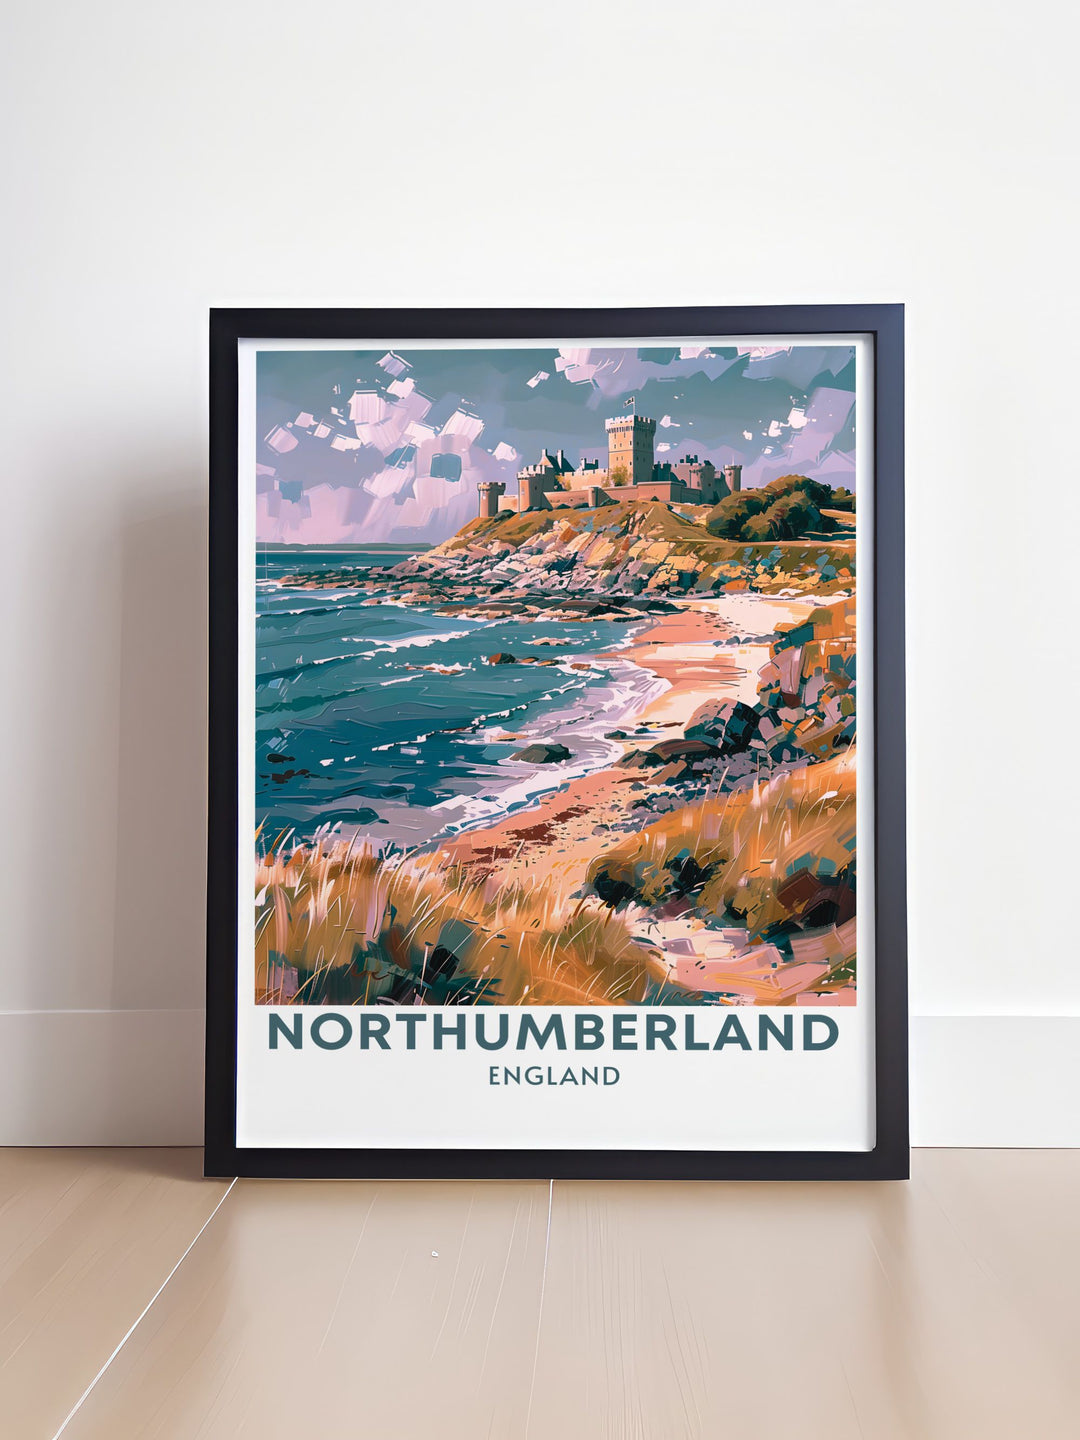 Stunning Bamburgh Castle travel poster showcasing the castles grandeur on the Northumberland Coast. Ideal for home decor, gifts, and art collections, this print adds a touch of historical elegance to any space.